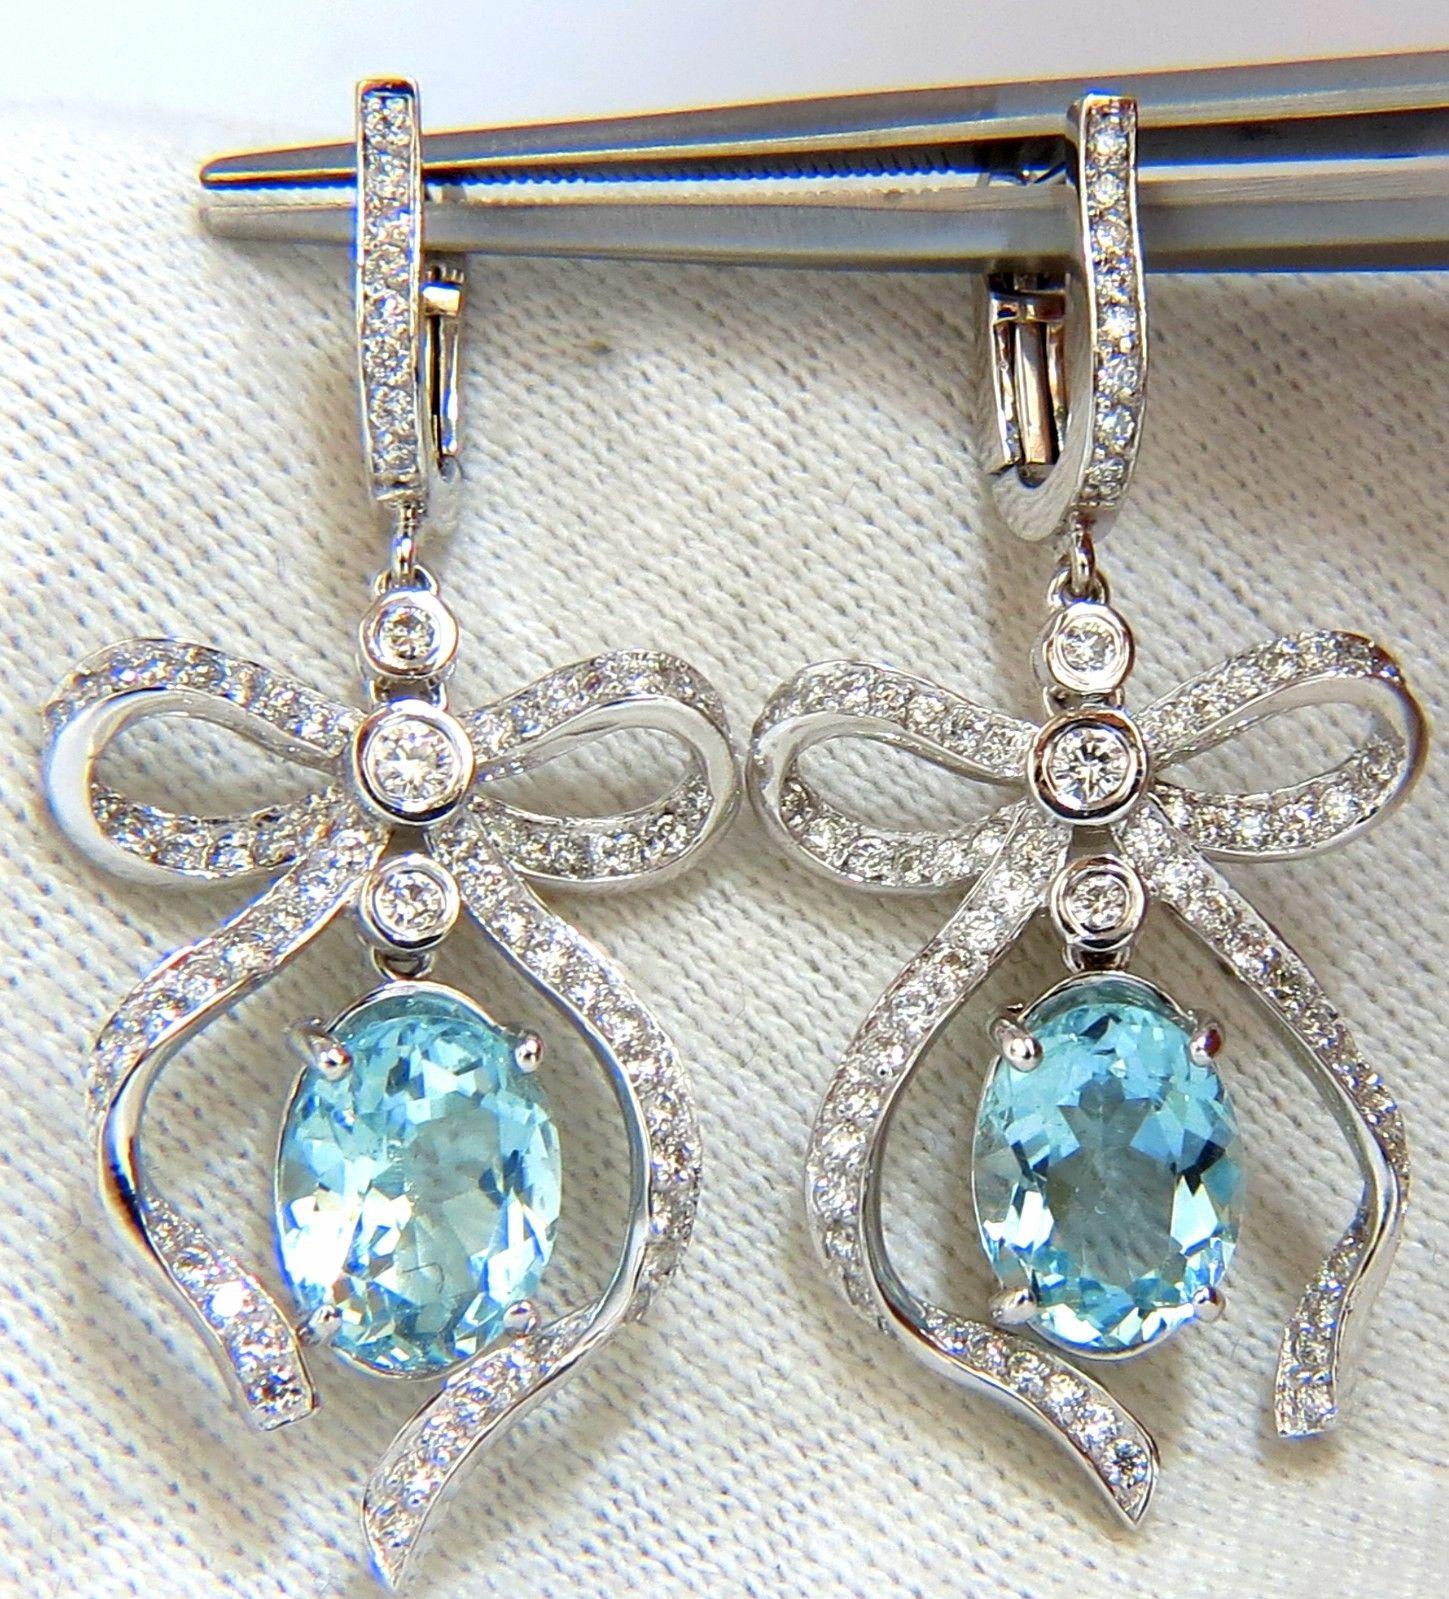 4.69ct. Natural Aquamarines & 1.26ct. Diamond dangle earrings.

Aquamarines: Oval cut, transparent & clean clarity.

Fully faceted & gorgeous vivid aqua colors

Range: 9.8 X 8mm each.



1.26cts of round diamonds: 

G-color, Vs-2 clarity.

14kt.